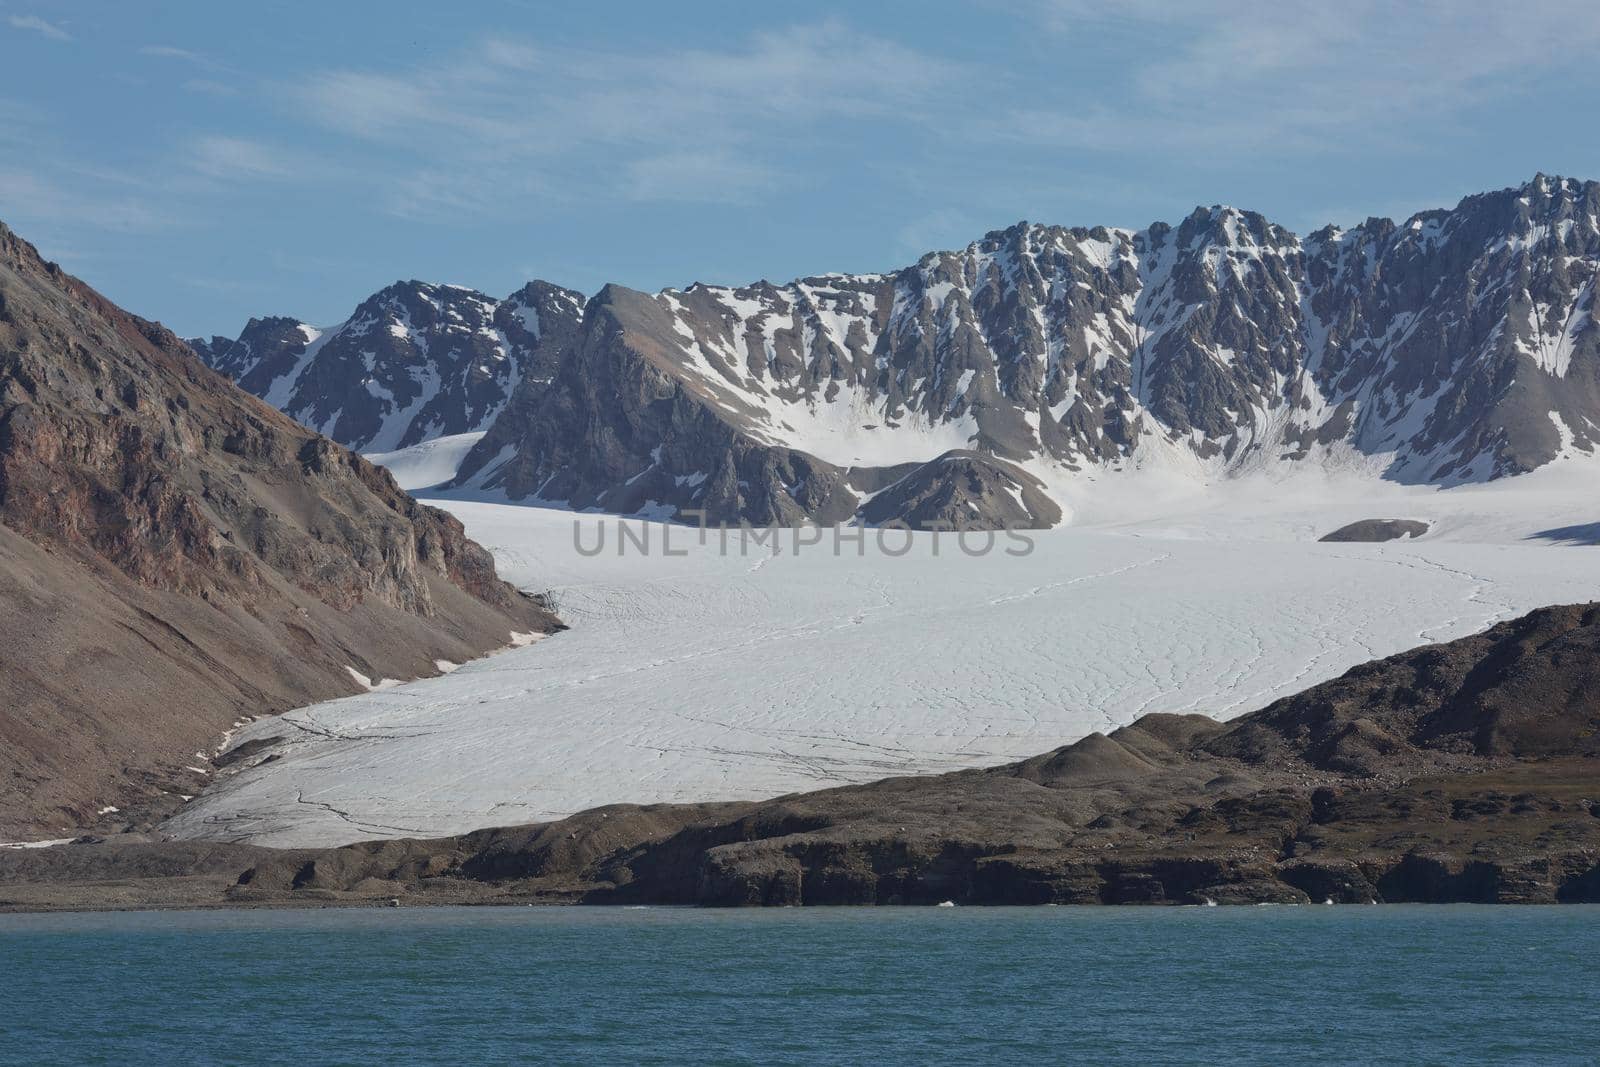 Mountains, glaciers and coastline landscape close to a village called "Ny-Ålesund" located at 79 degree North on Spitsbergen.